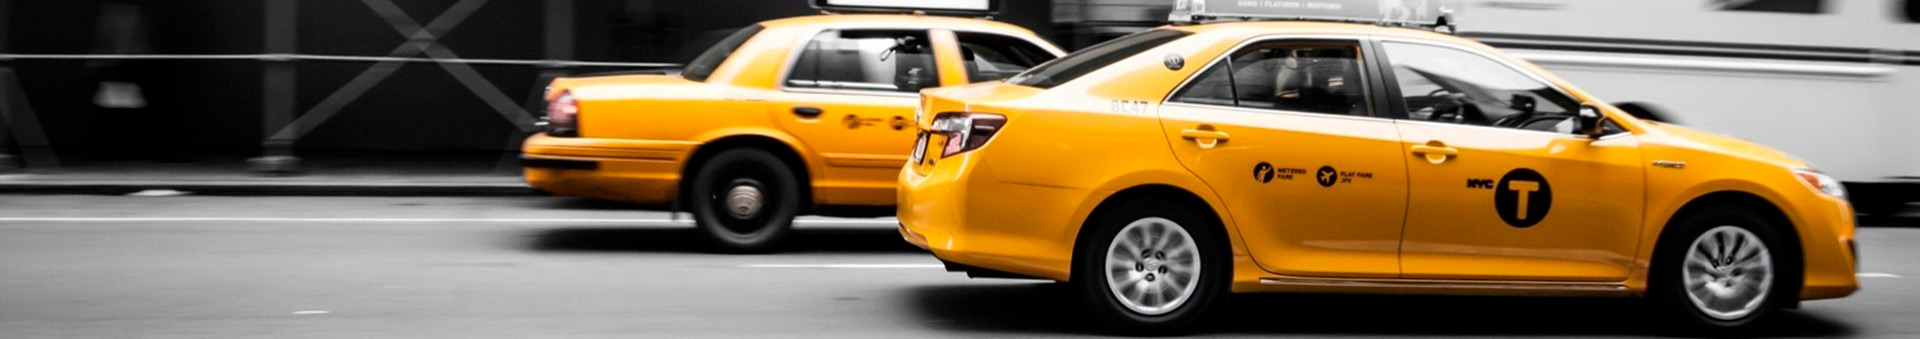 Advantages of an engine lock taxi tracking system